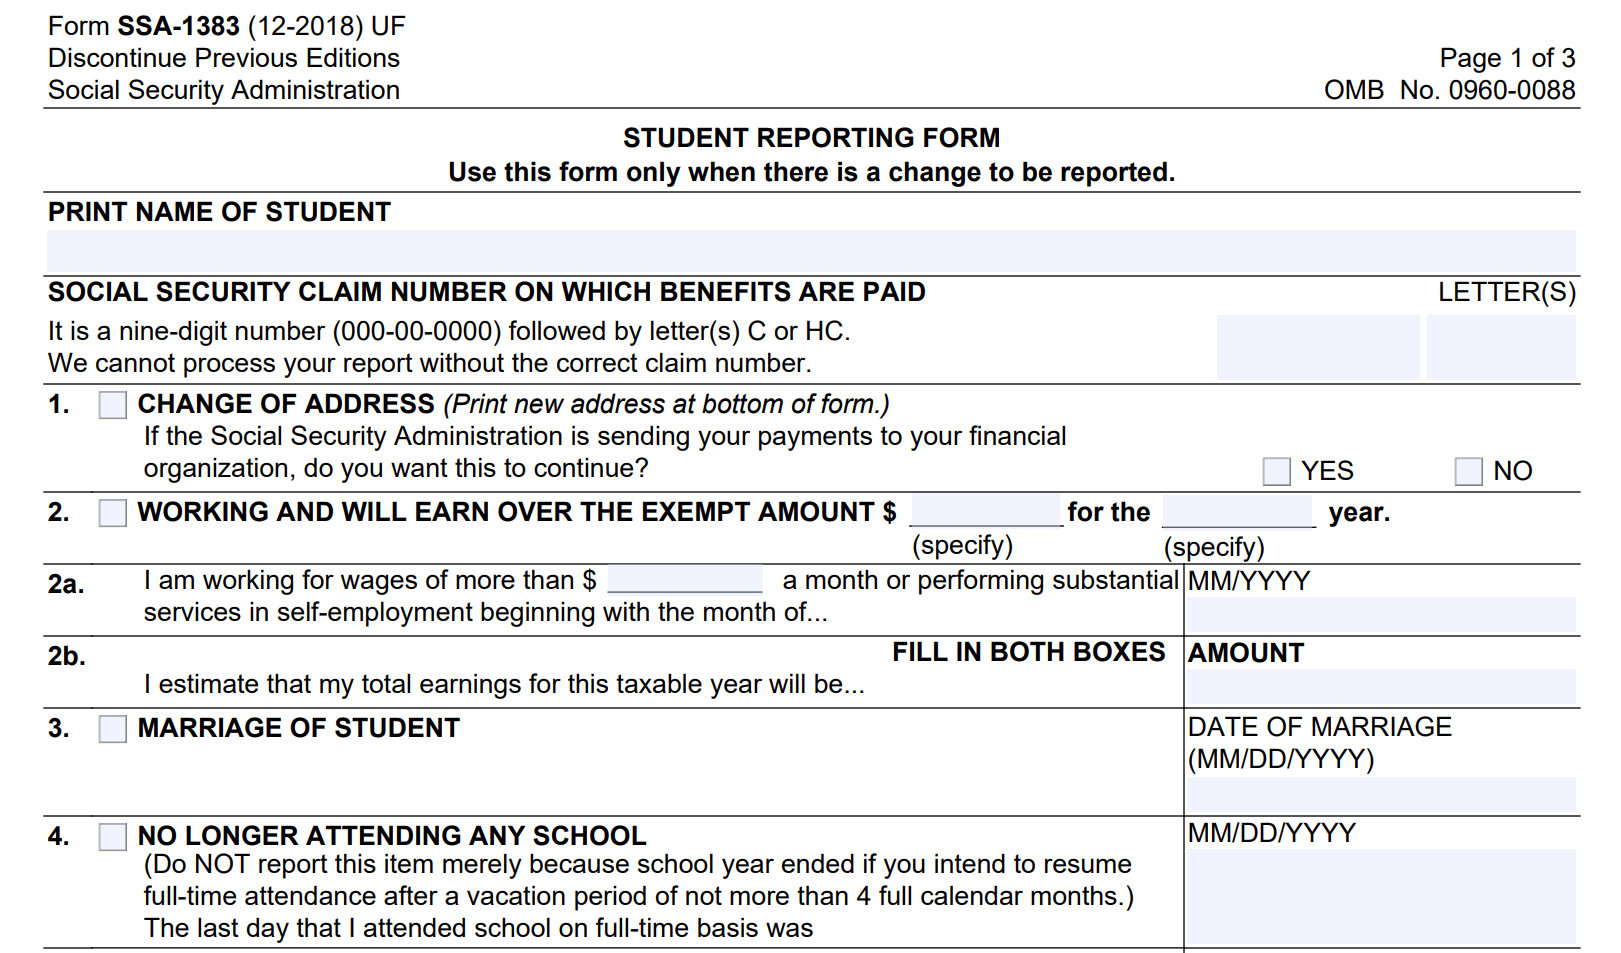 Form SSA-1383: Student Reporting Form